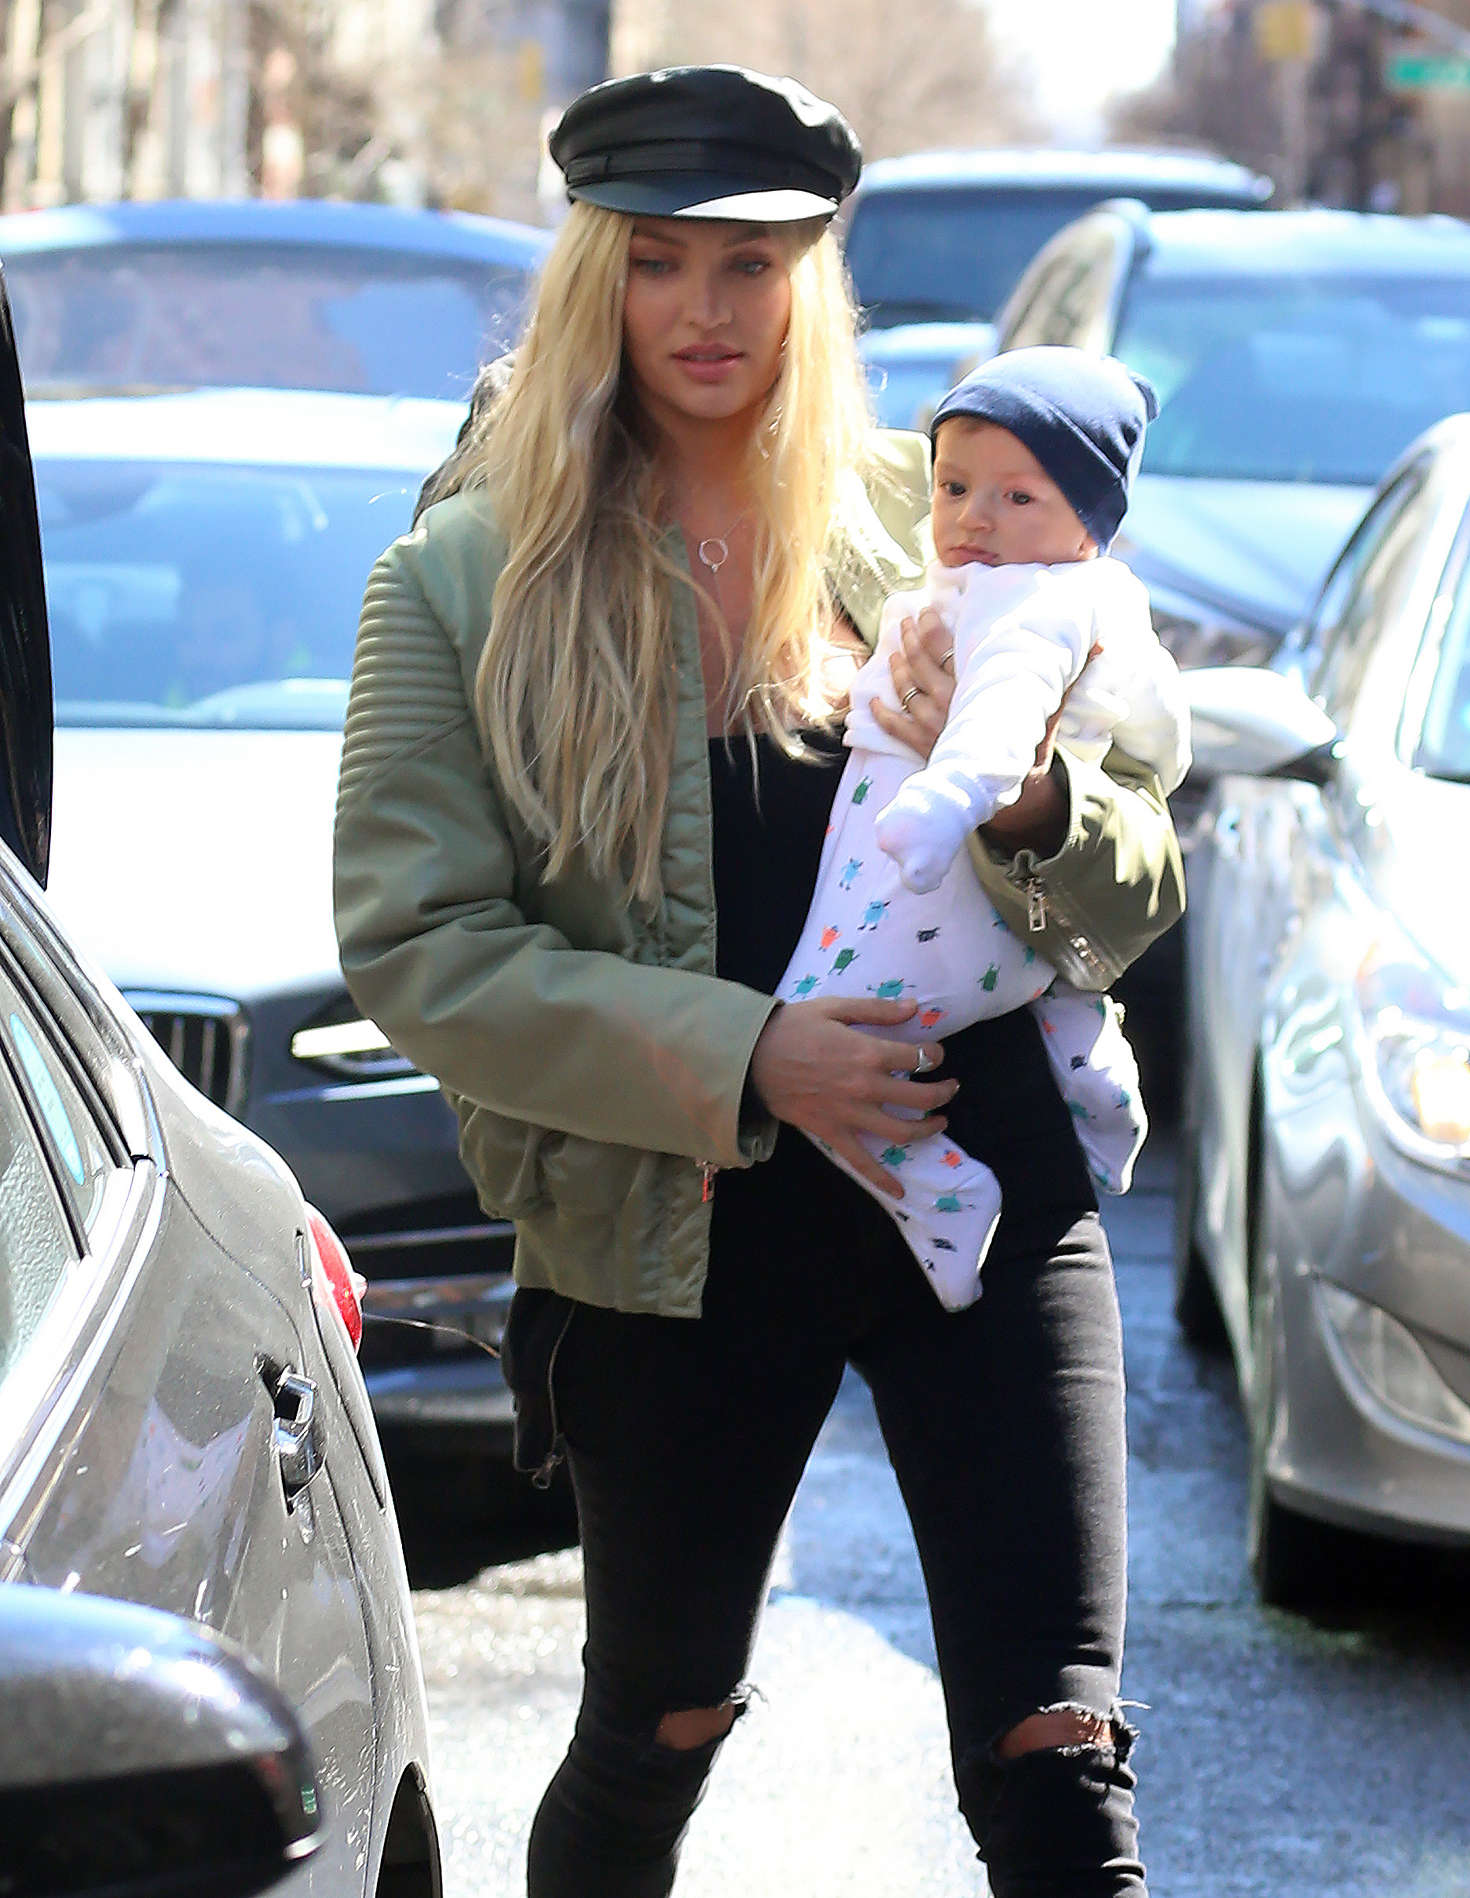 Candice Swanepoel With Her Son Out in NYC -14 | GotCeleb